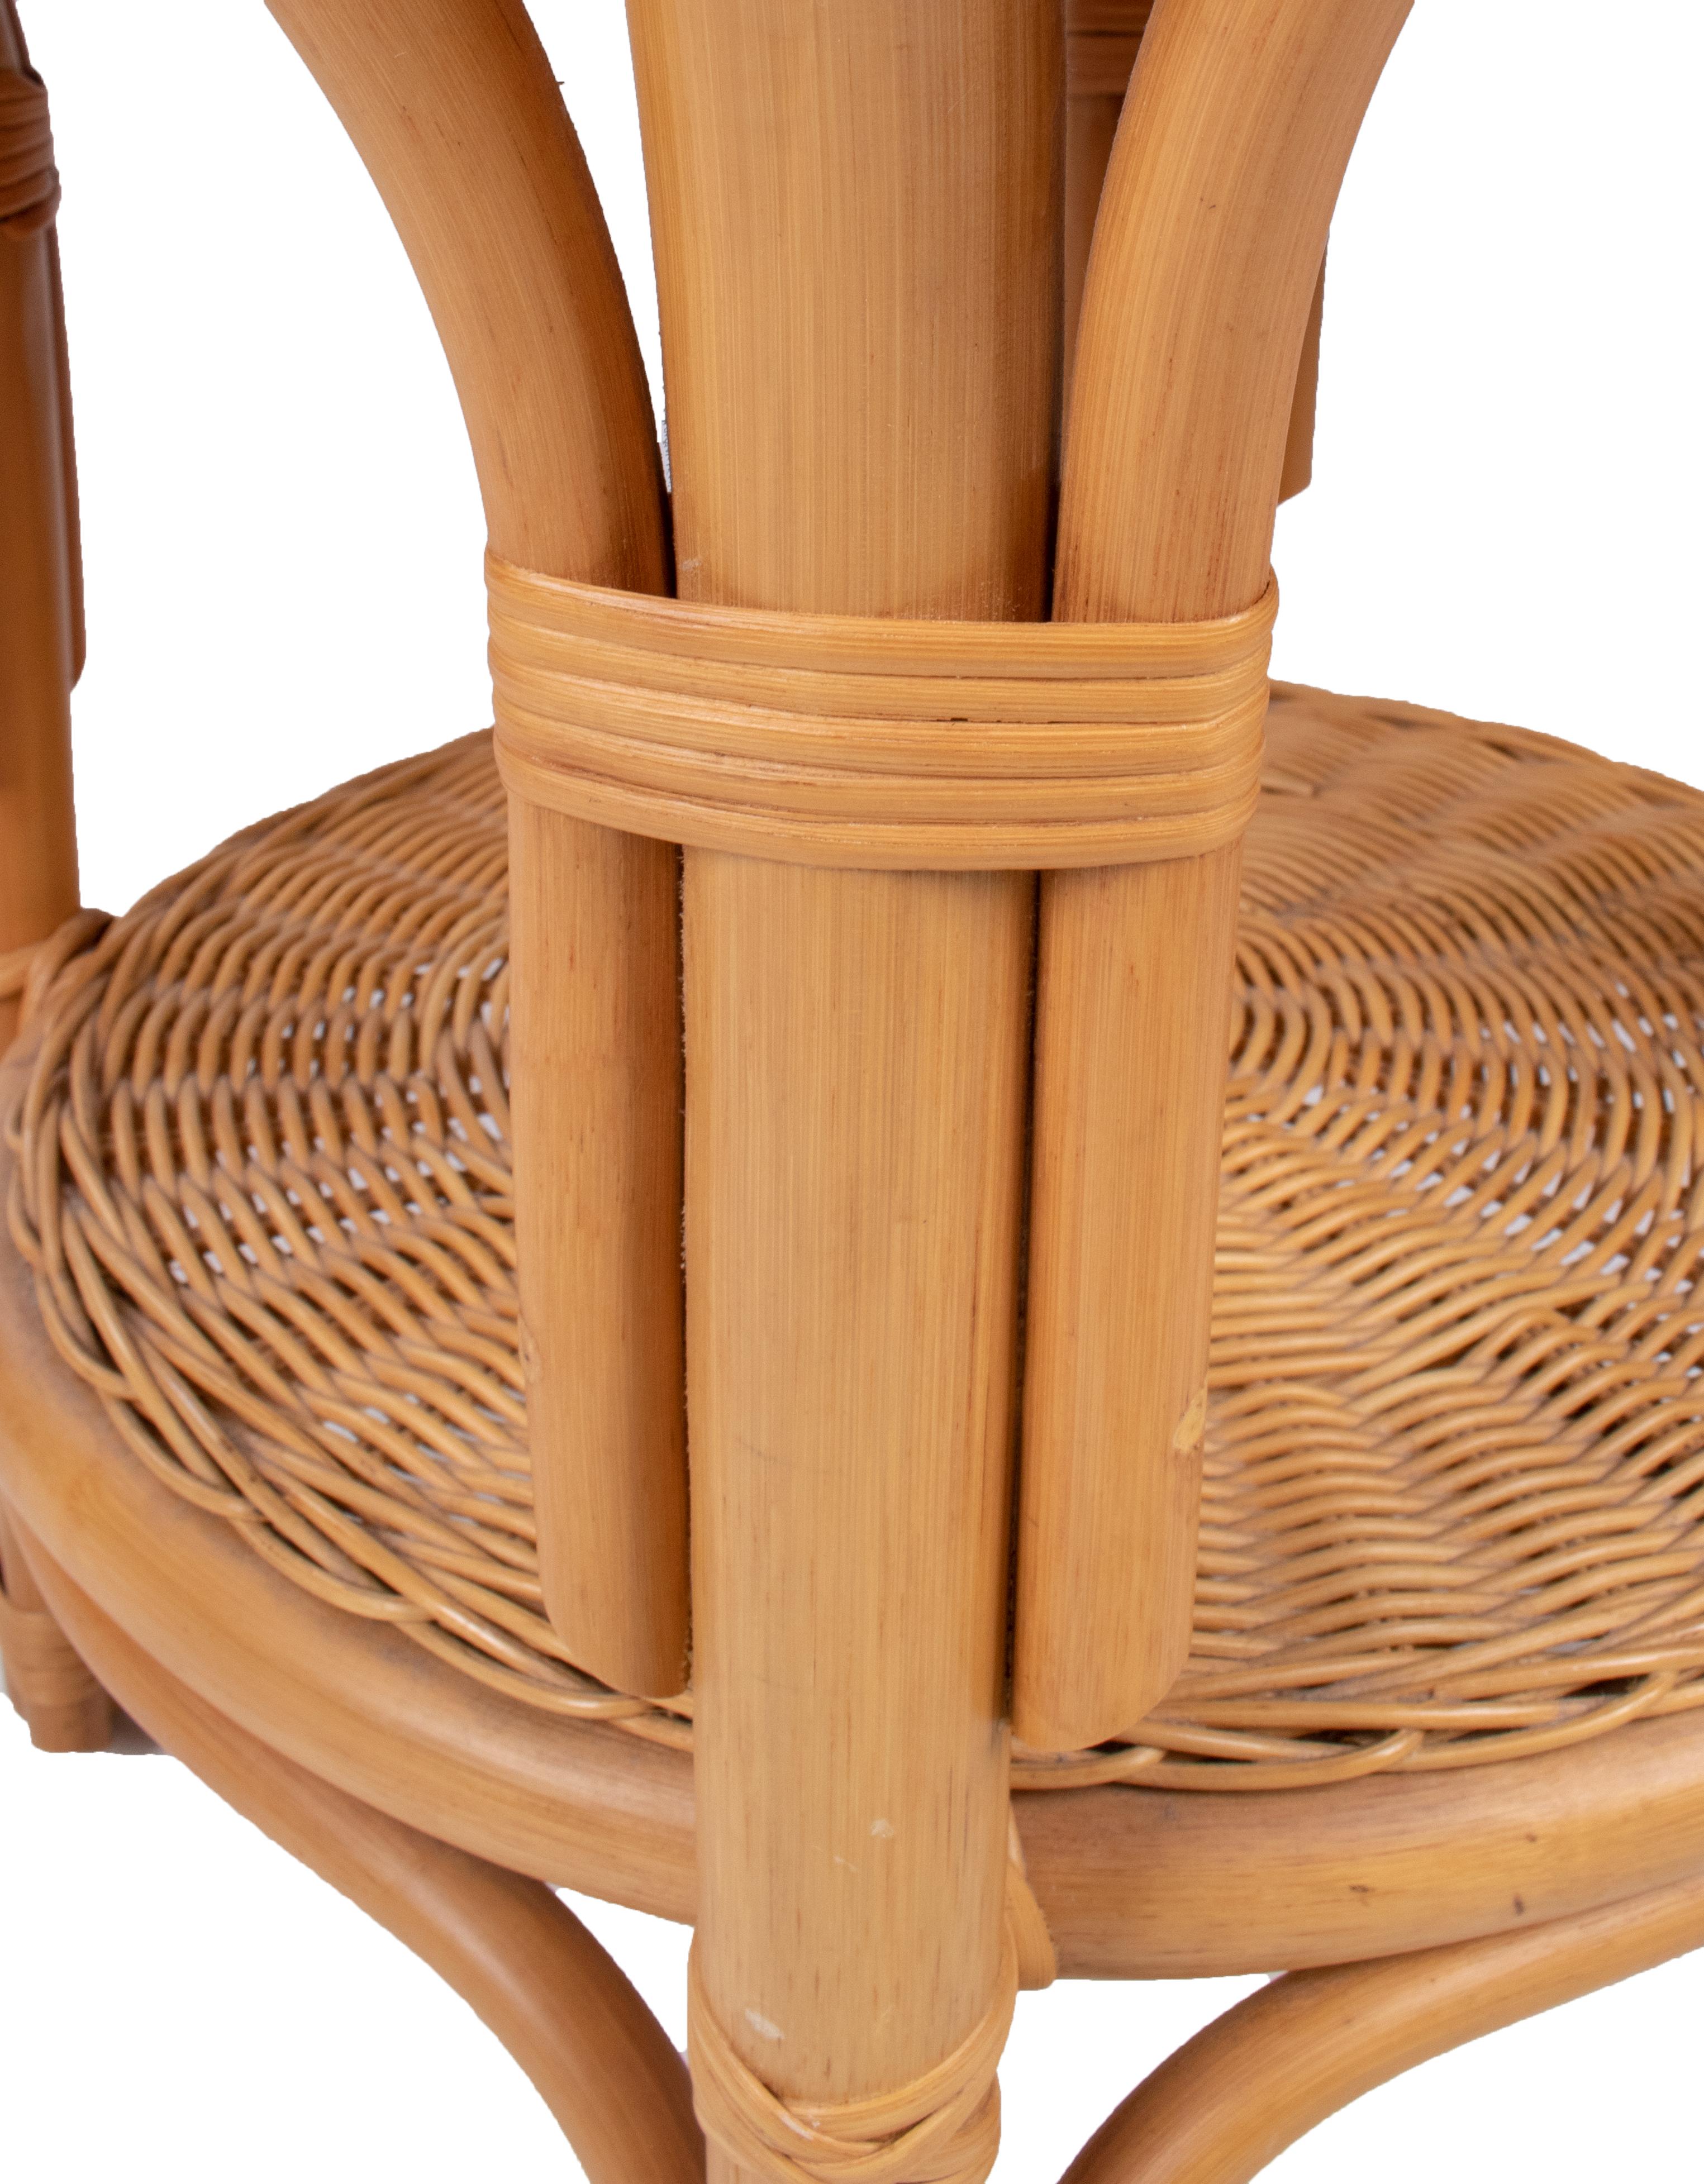 20th Century 1980s Spanish Bamboo and Wicker Round Side Table